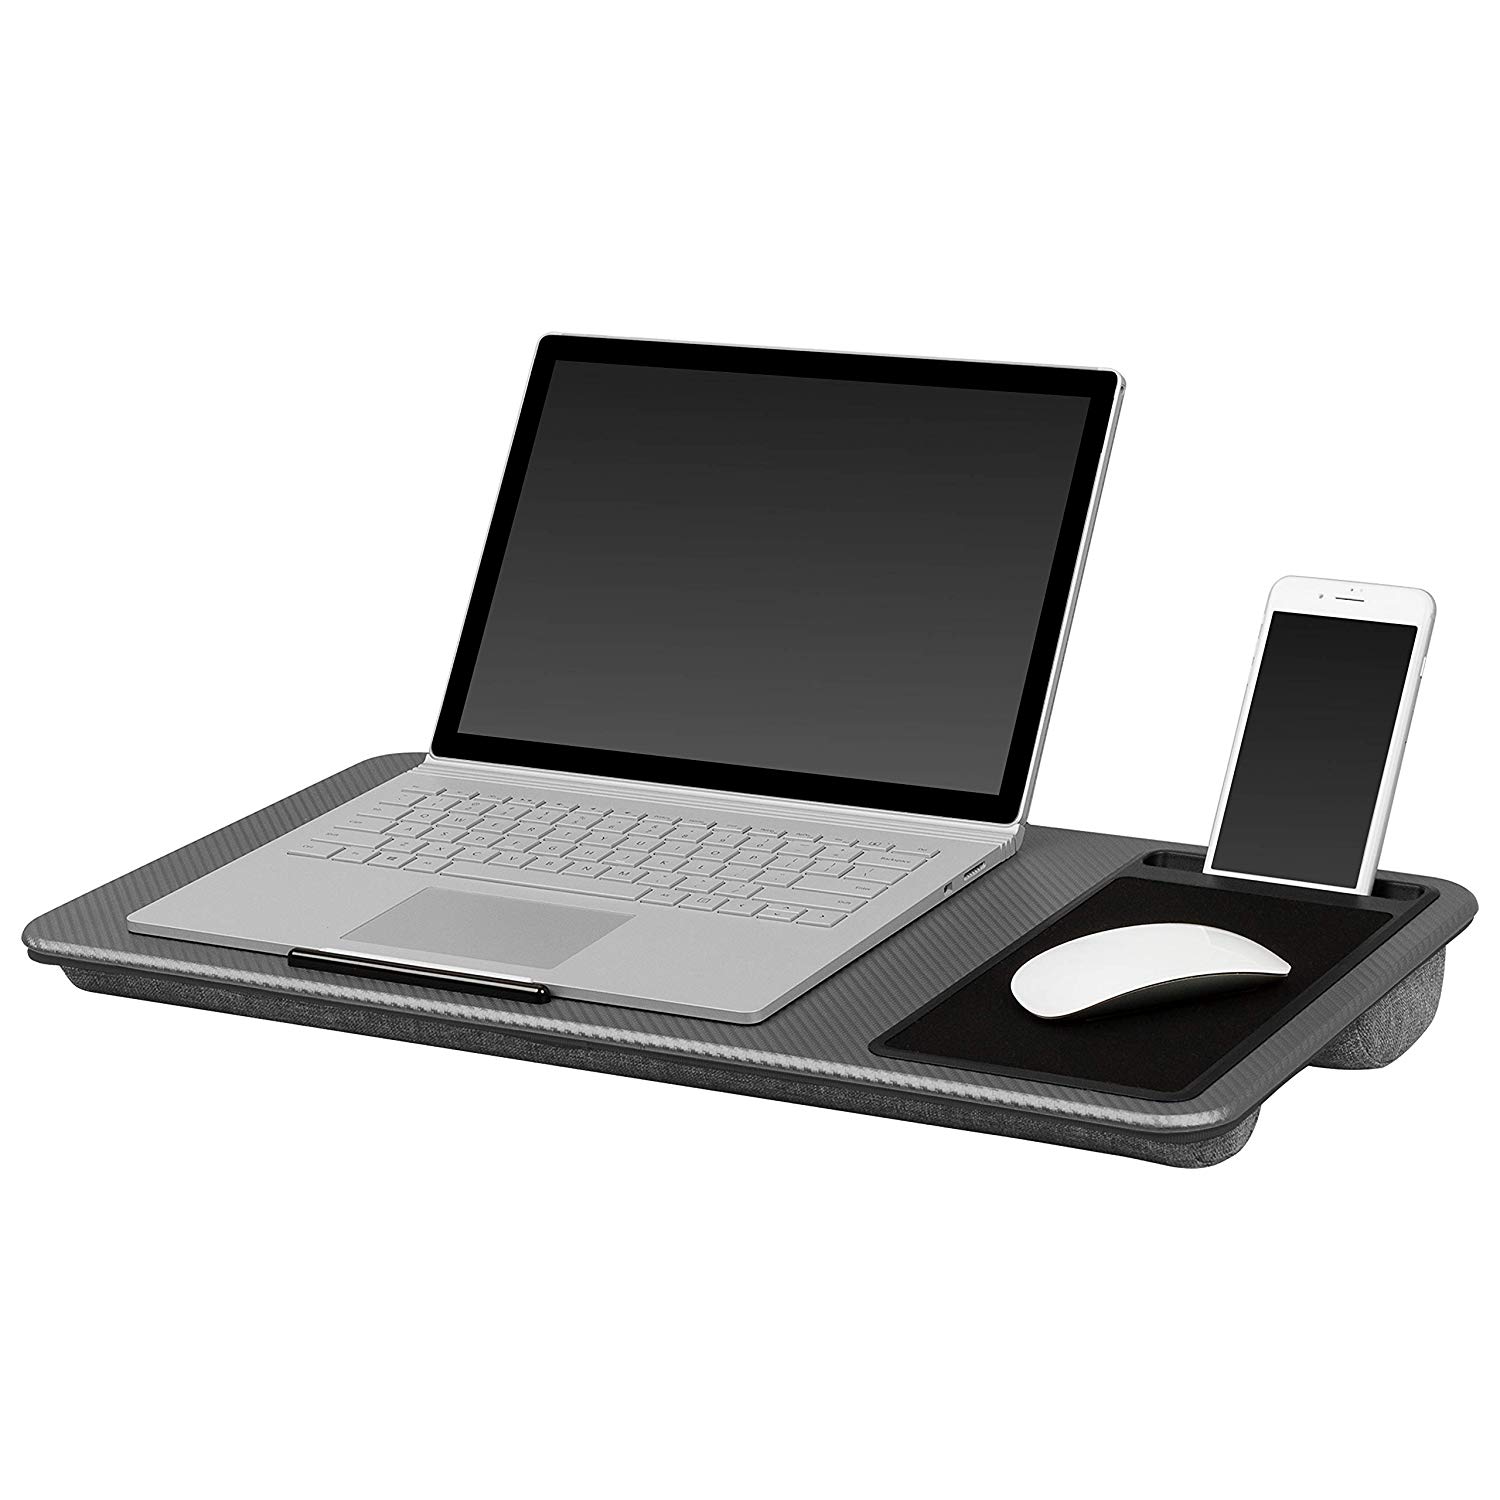 Top 10 Best Laptop Accessories Improve Your User Experience